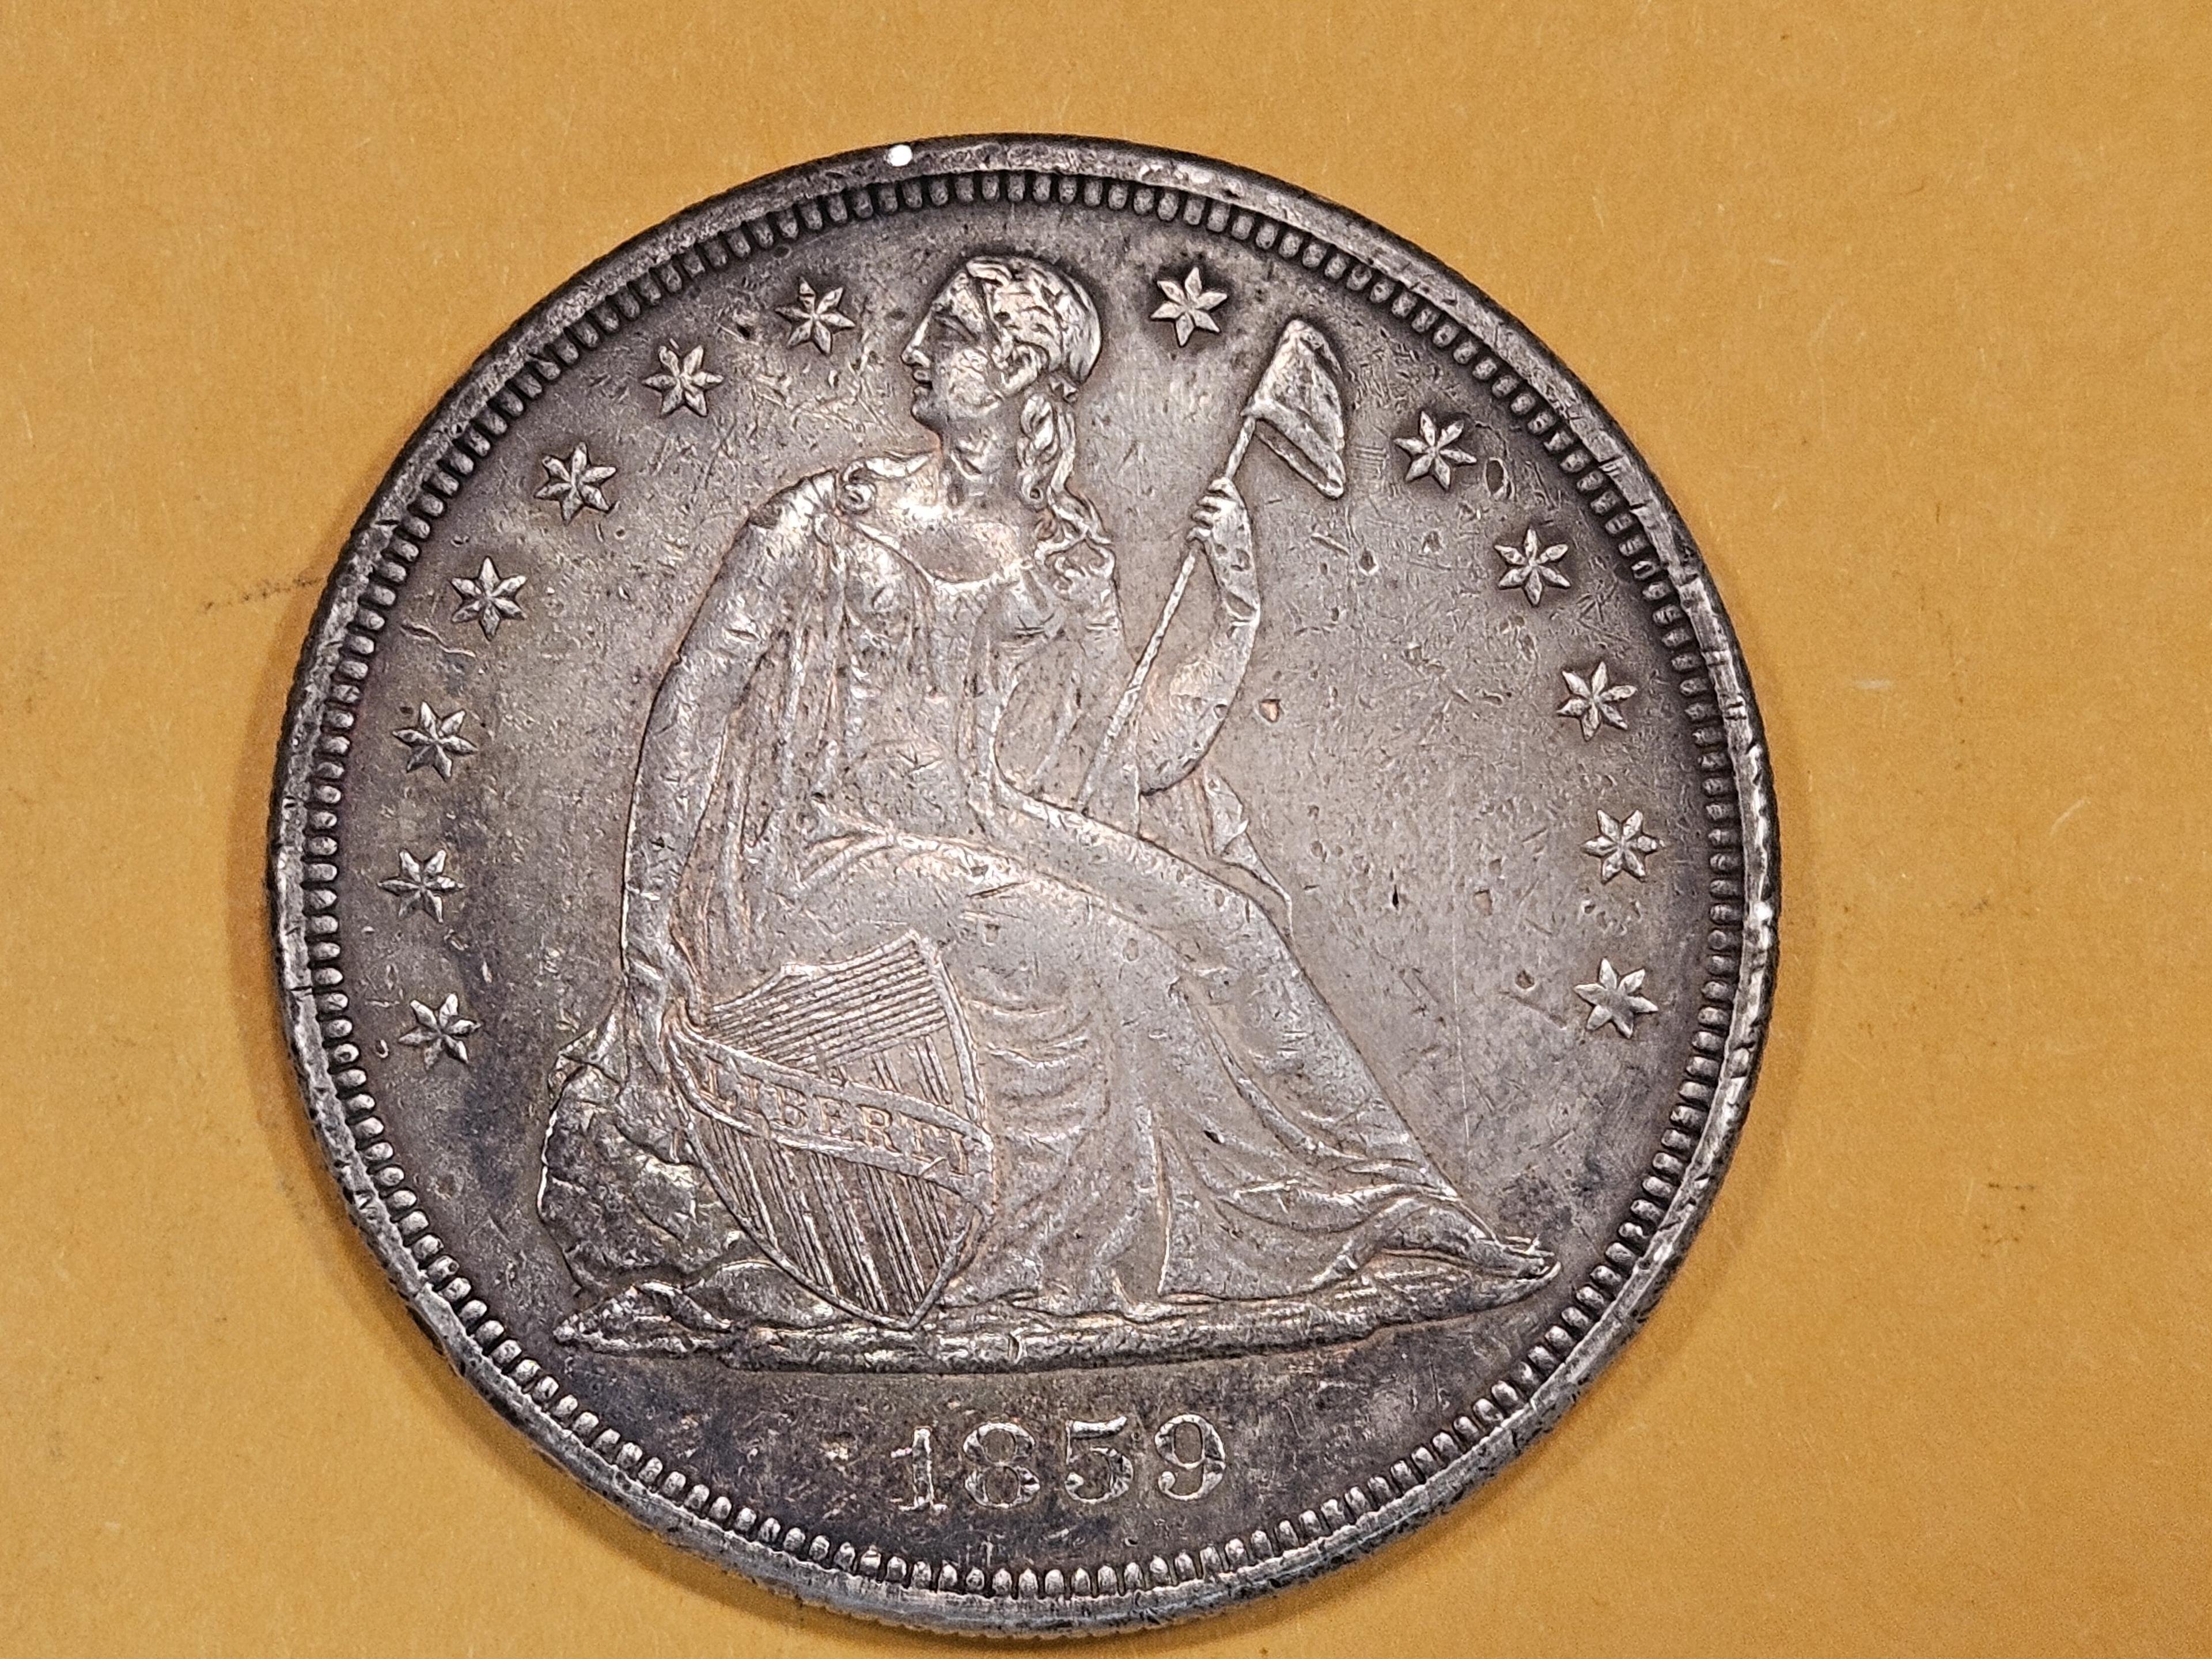 ** HIGHLIGHT *** 1859 Seated Dollar in About Uncirculated